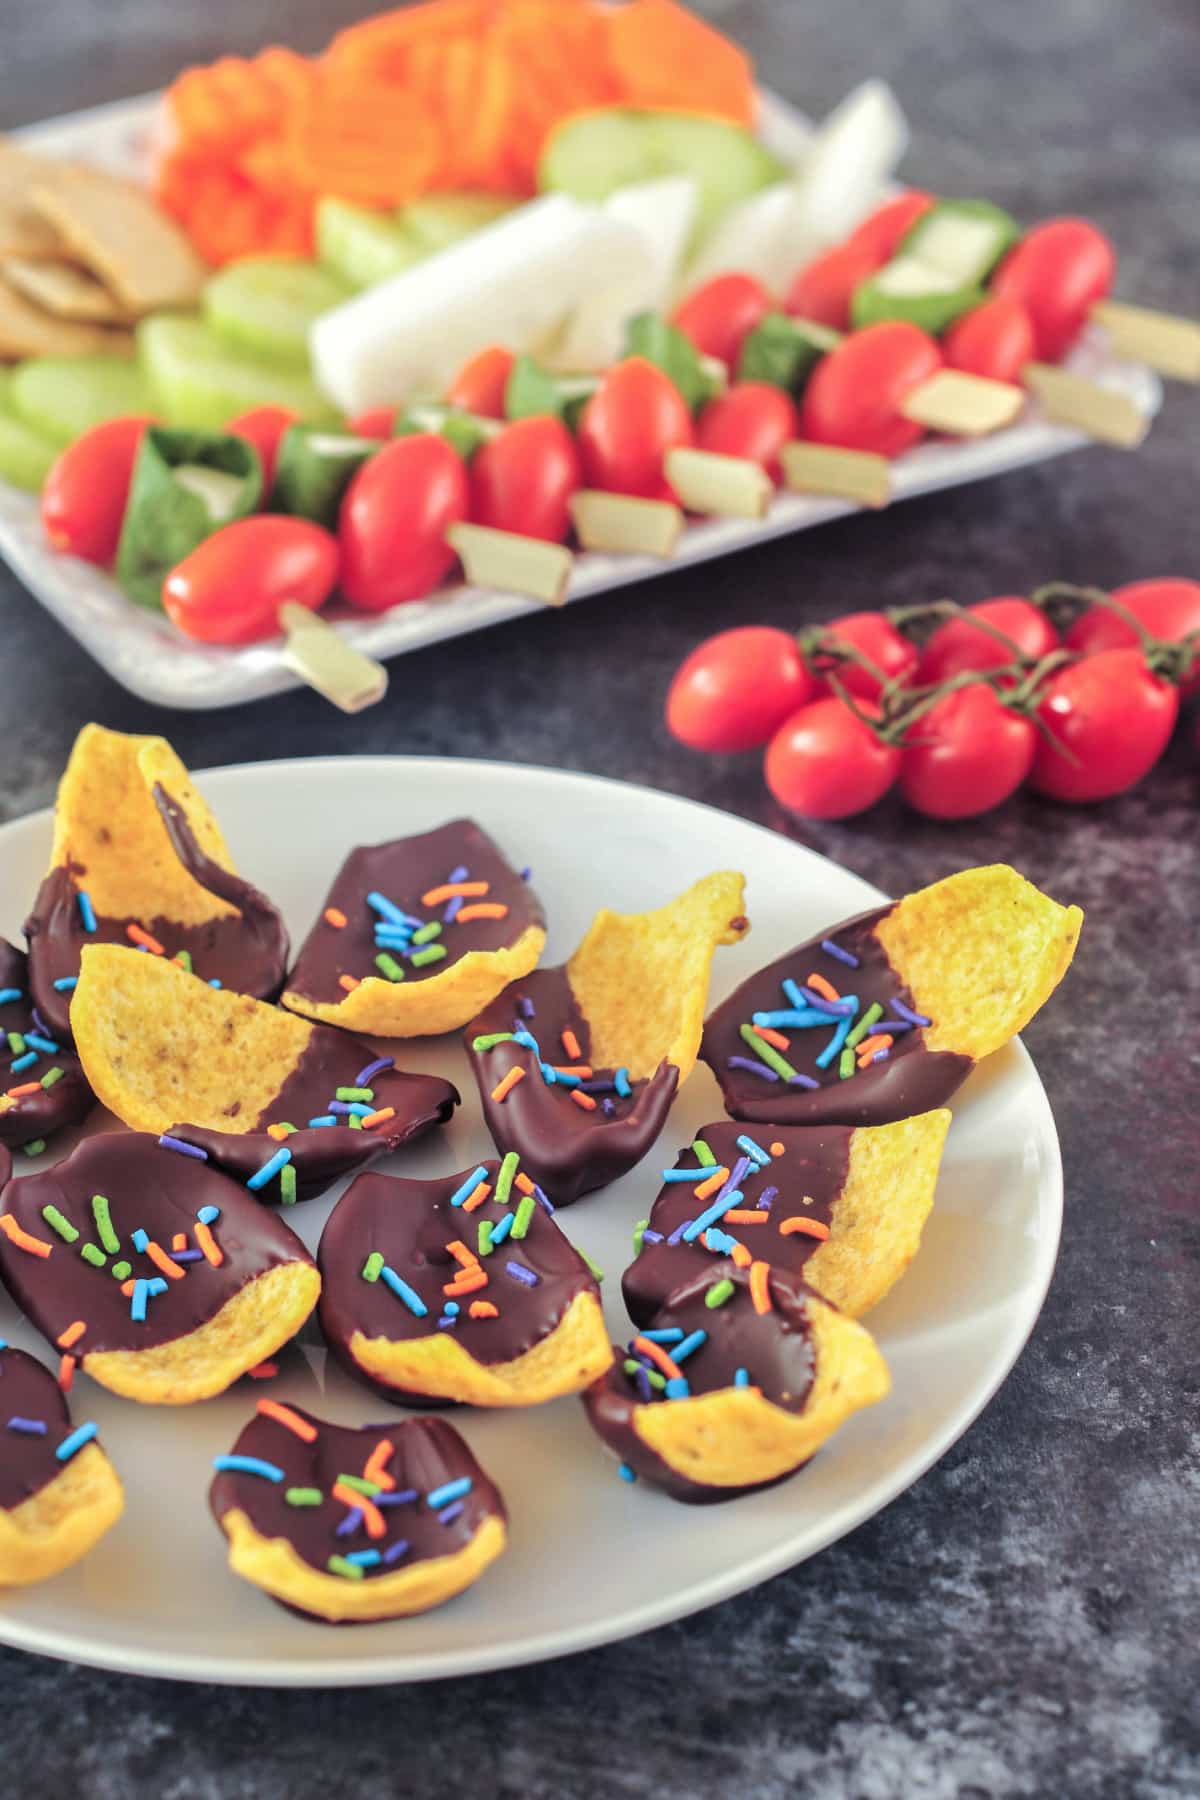 A white plate of chocolate dipped corn chips with multi colored sprinkles in the chocolate. Another serving plate of veggies and crackers is blurred in background on a table set for a party.